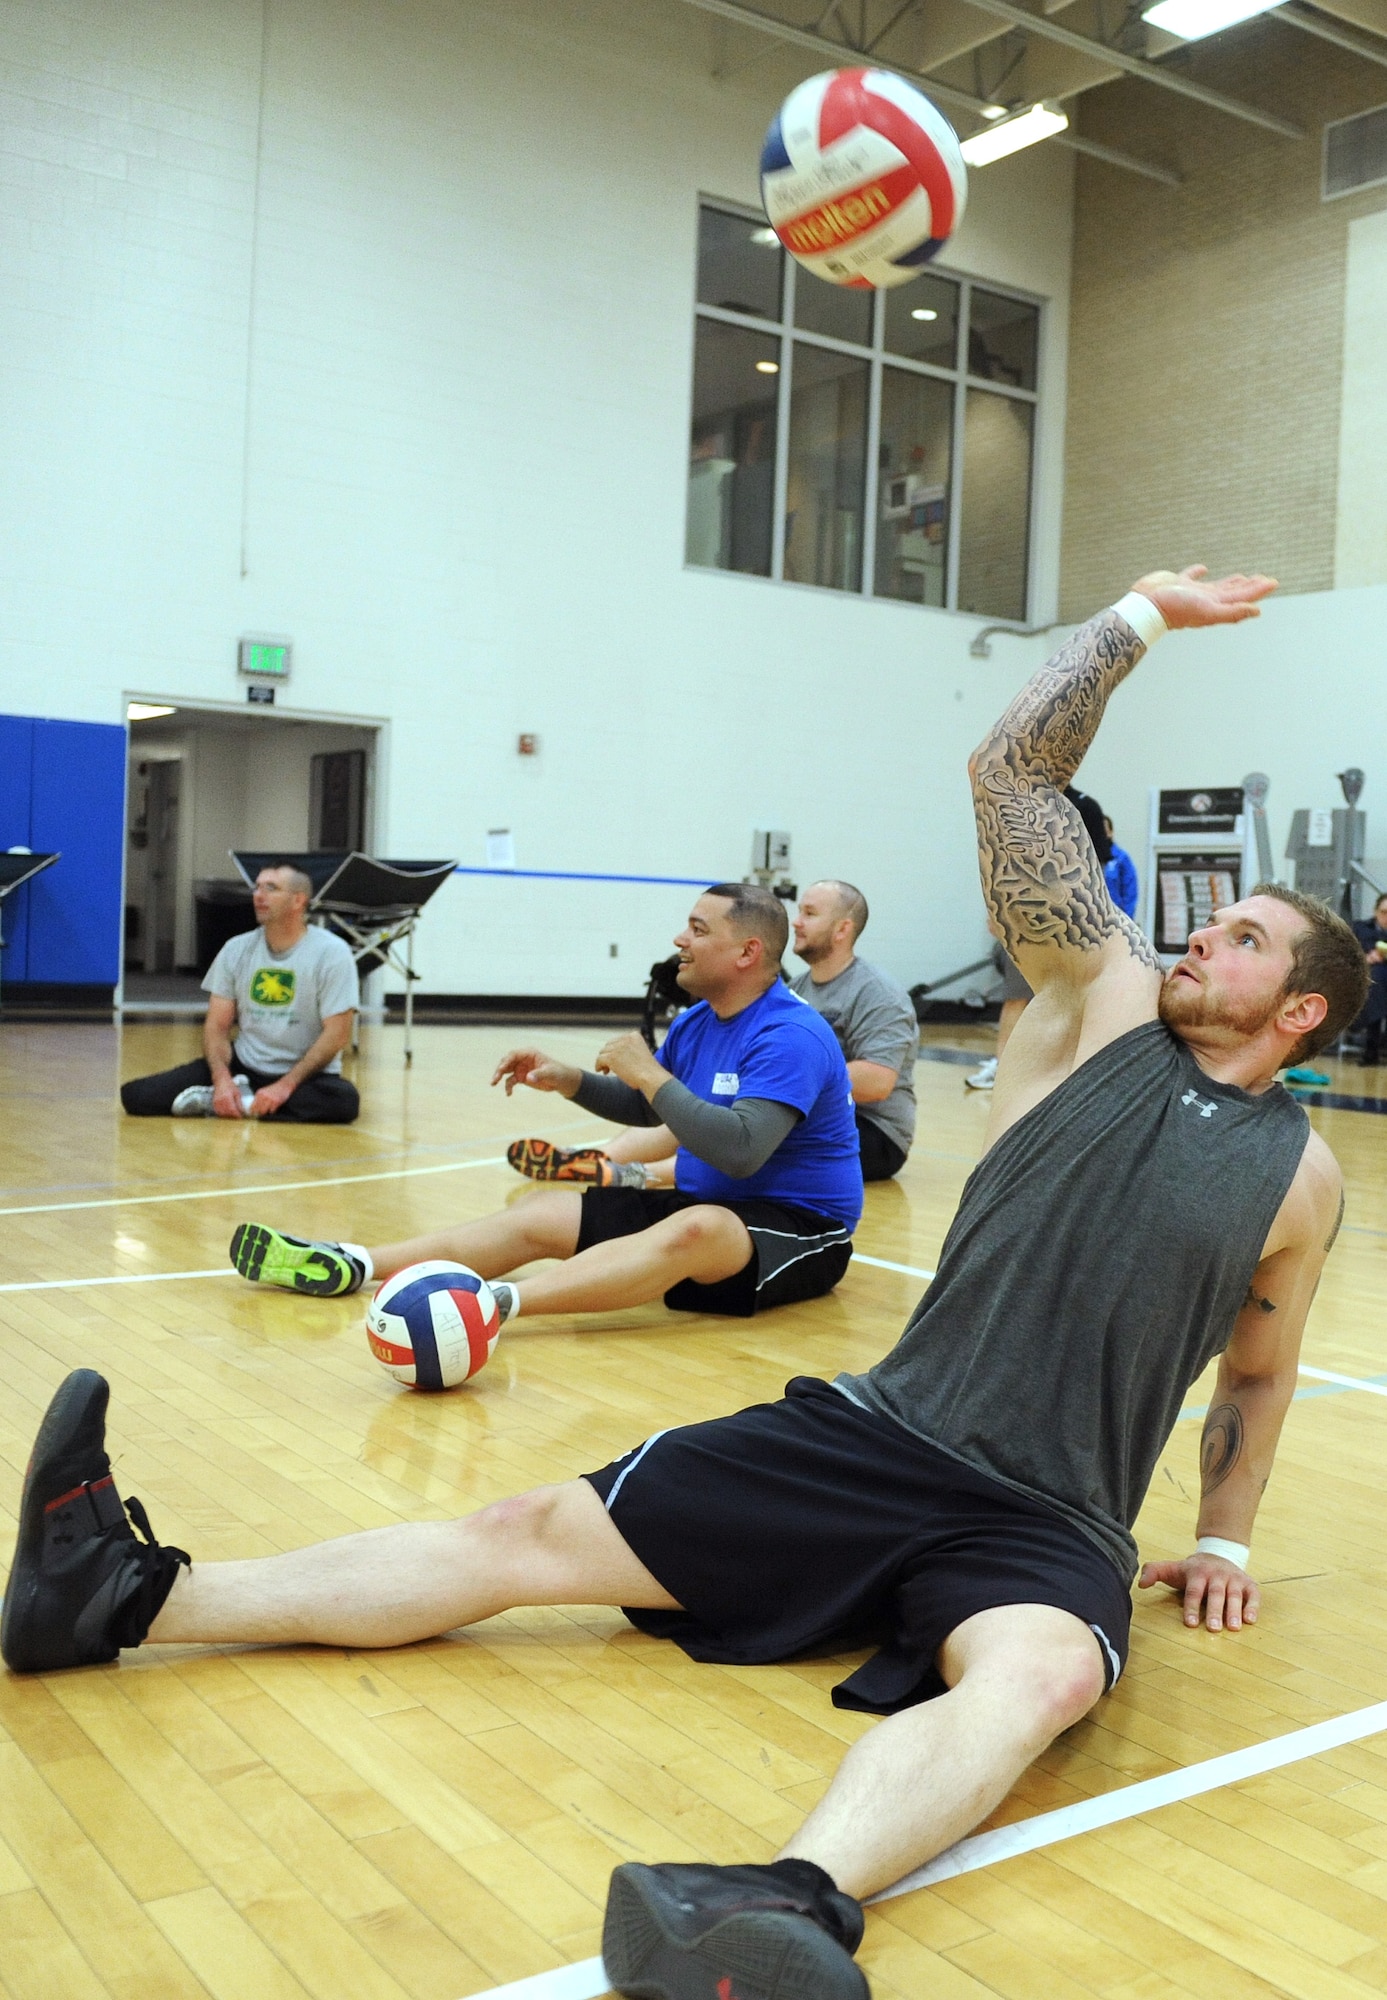 Retired Senior Airman Brandon Bishop practices a volley during sitting volleyball, one of seven events that the Air Force Warrior Games team practiced for the week of April 15-19 in preparation for the 2013 Warrior Games. one of seven events that the Air Force Warrior Games team practiced for the week of April 15-19 in preparation for the 2013 Warrior Games. The Warrior Games is scheduled to take place May 11-16 at the Air Force Academy and U.S. Olympic Training Center in Colorado Springs, Colo. (U.S. Air Force photo/John Van Winkle)